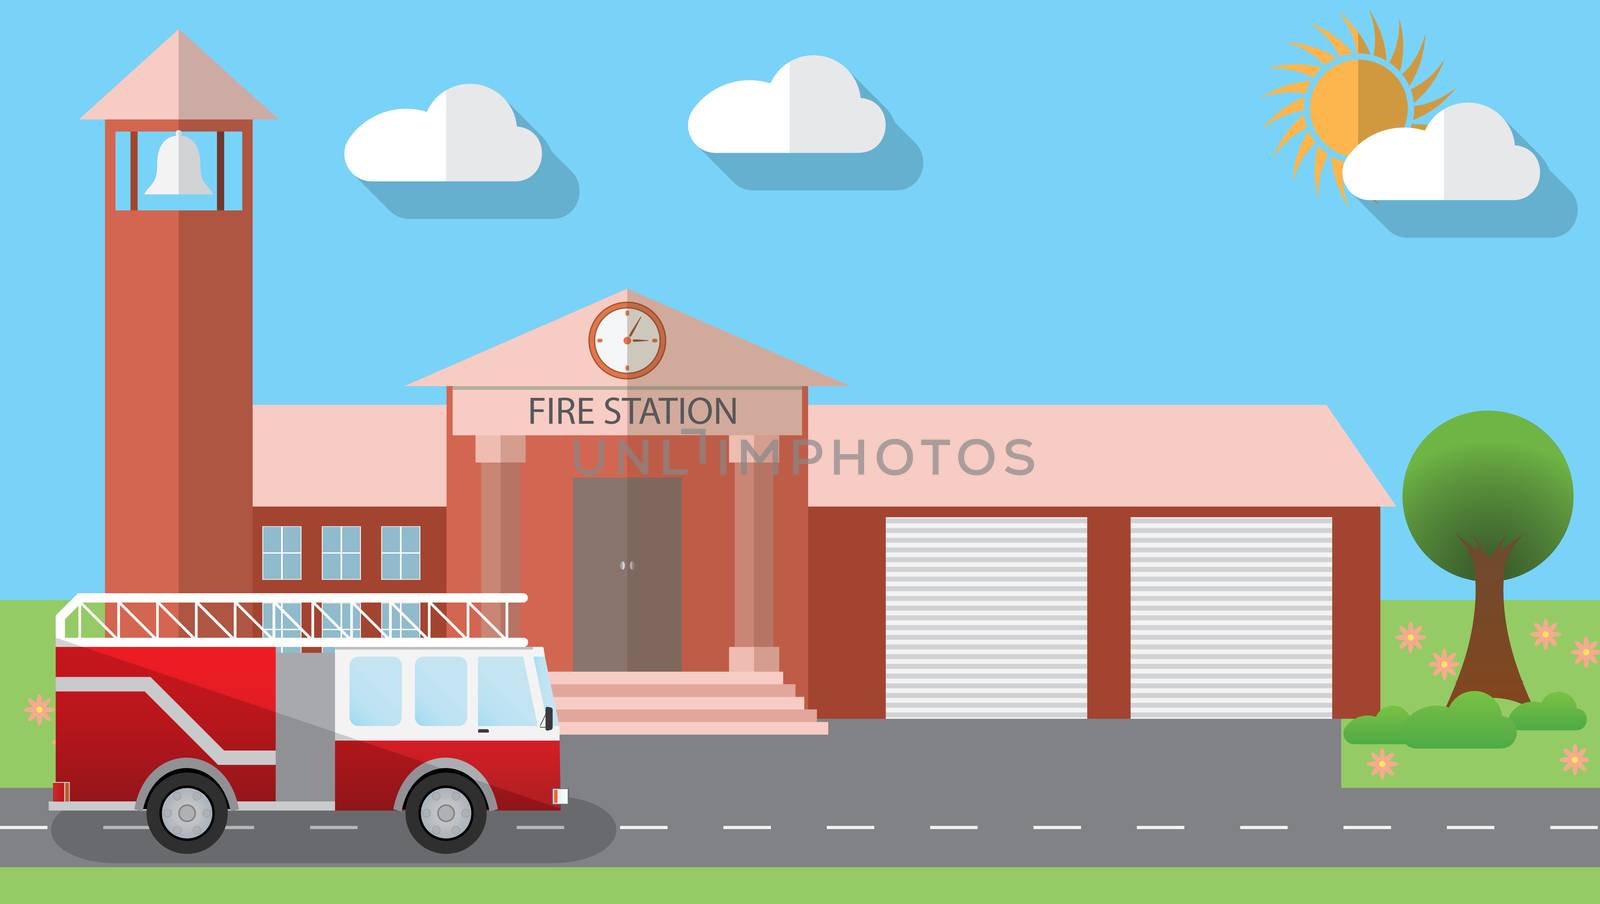 Flat design vector illustration of fire station building and parked fire truck in flat design style, vector illustration.